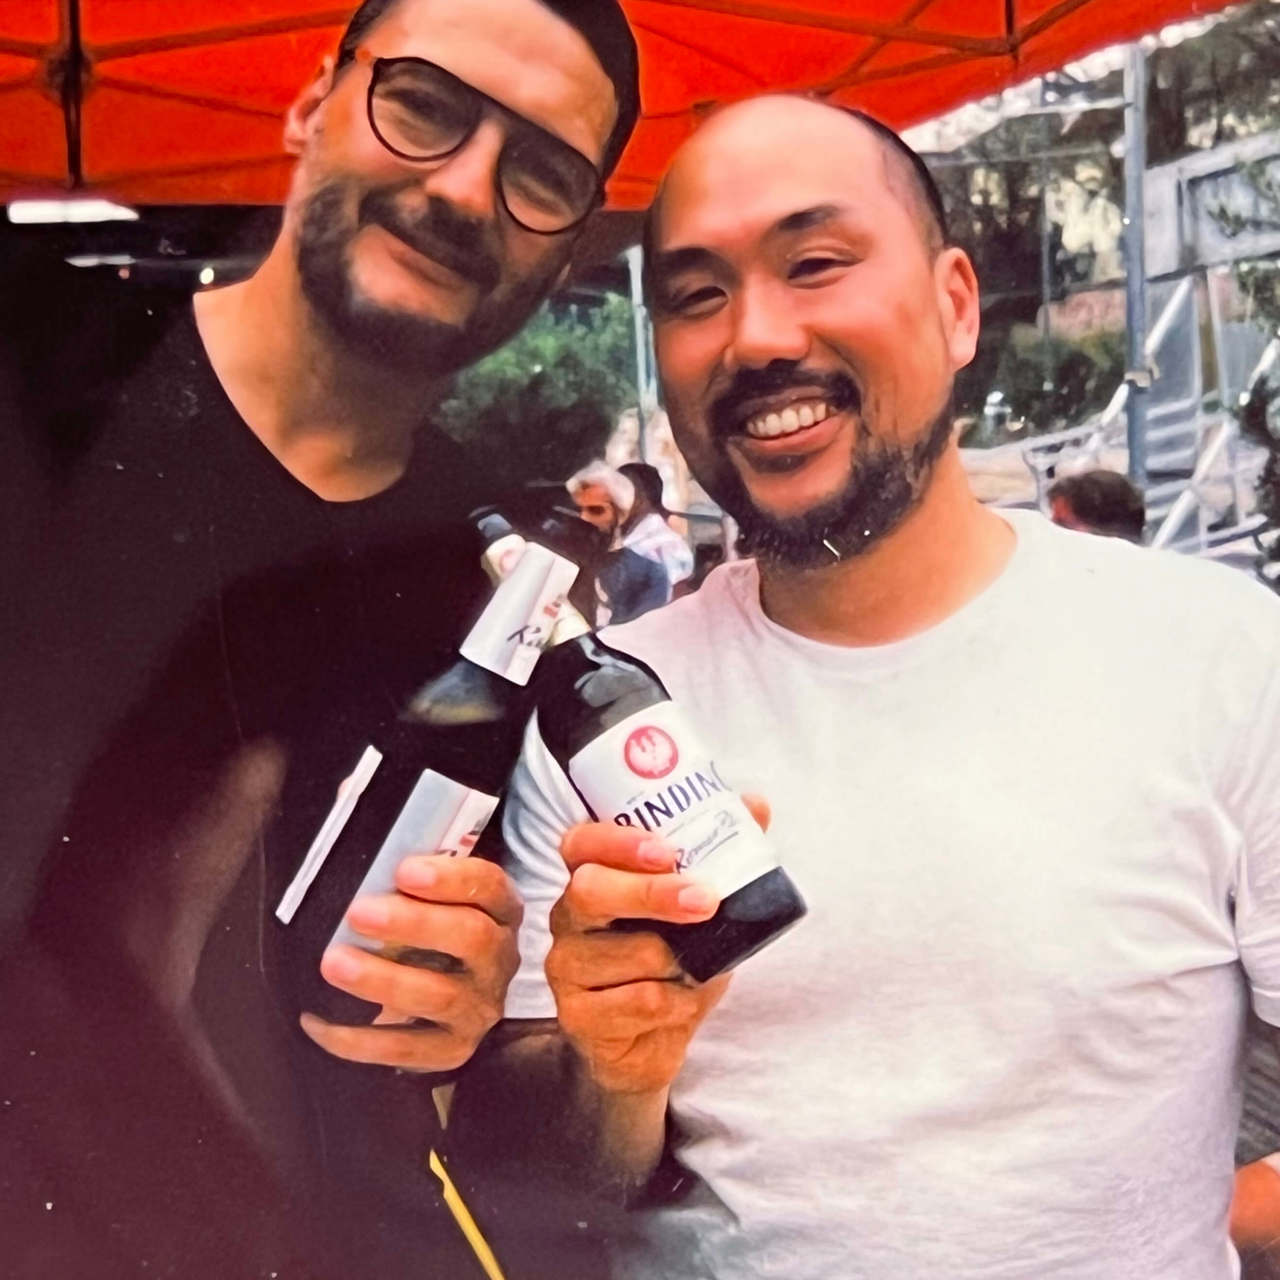 Two Keen employees smiling and clinking bottles together